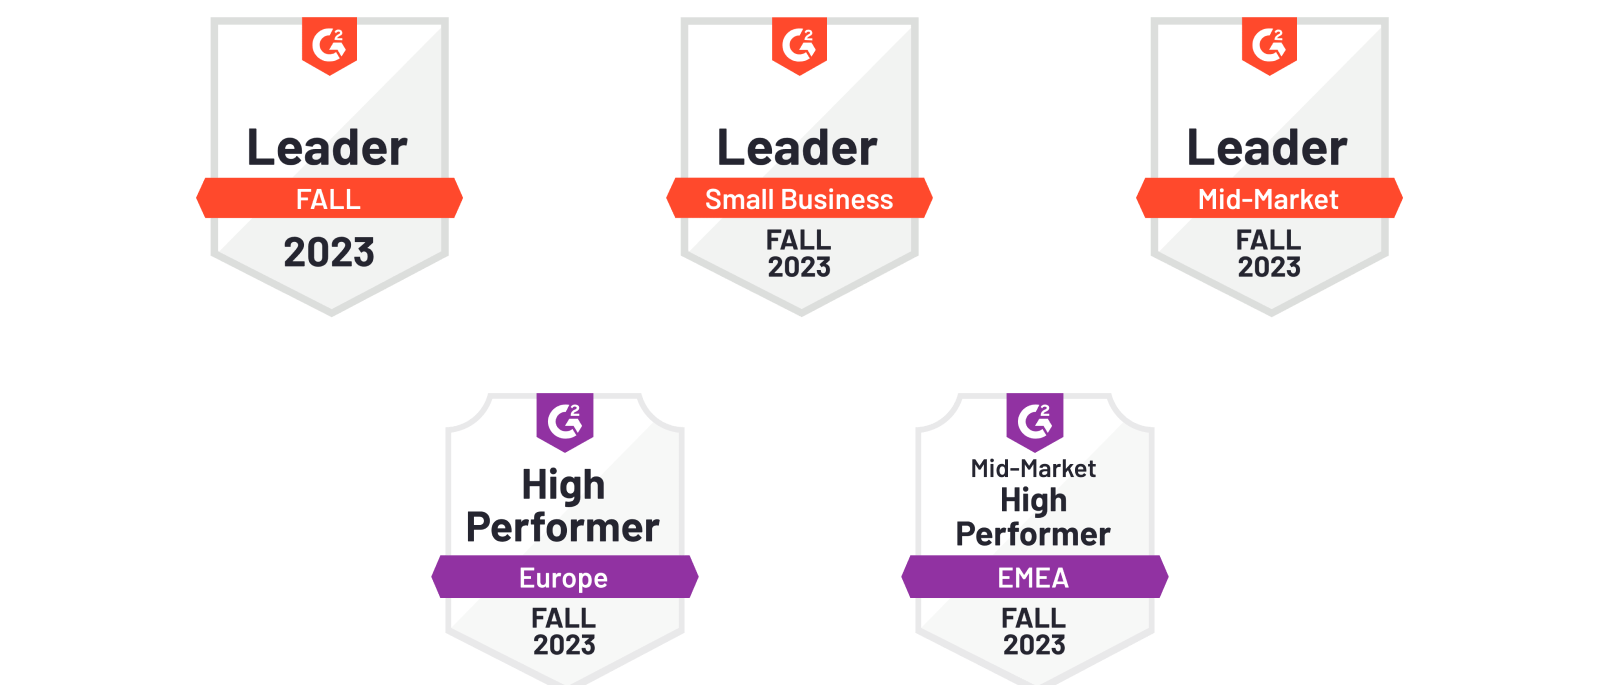 A grid of fall G2 badges: Leader, Leader Small Business, Leader Mid-Market, High Performer Europe, High Performer Mid-Market EMEA